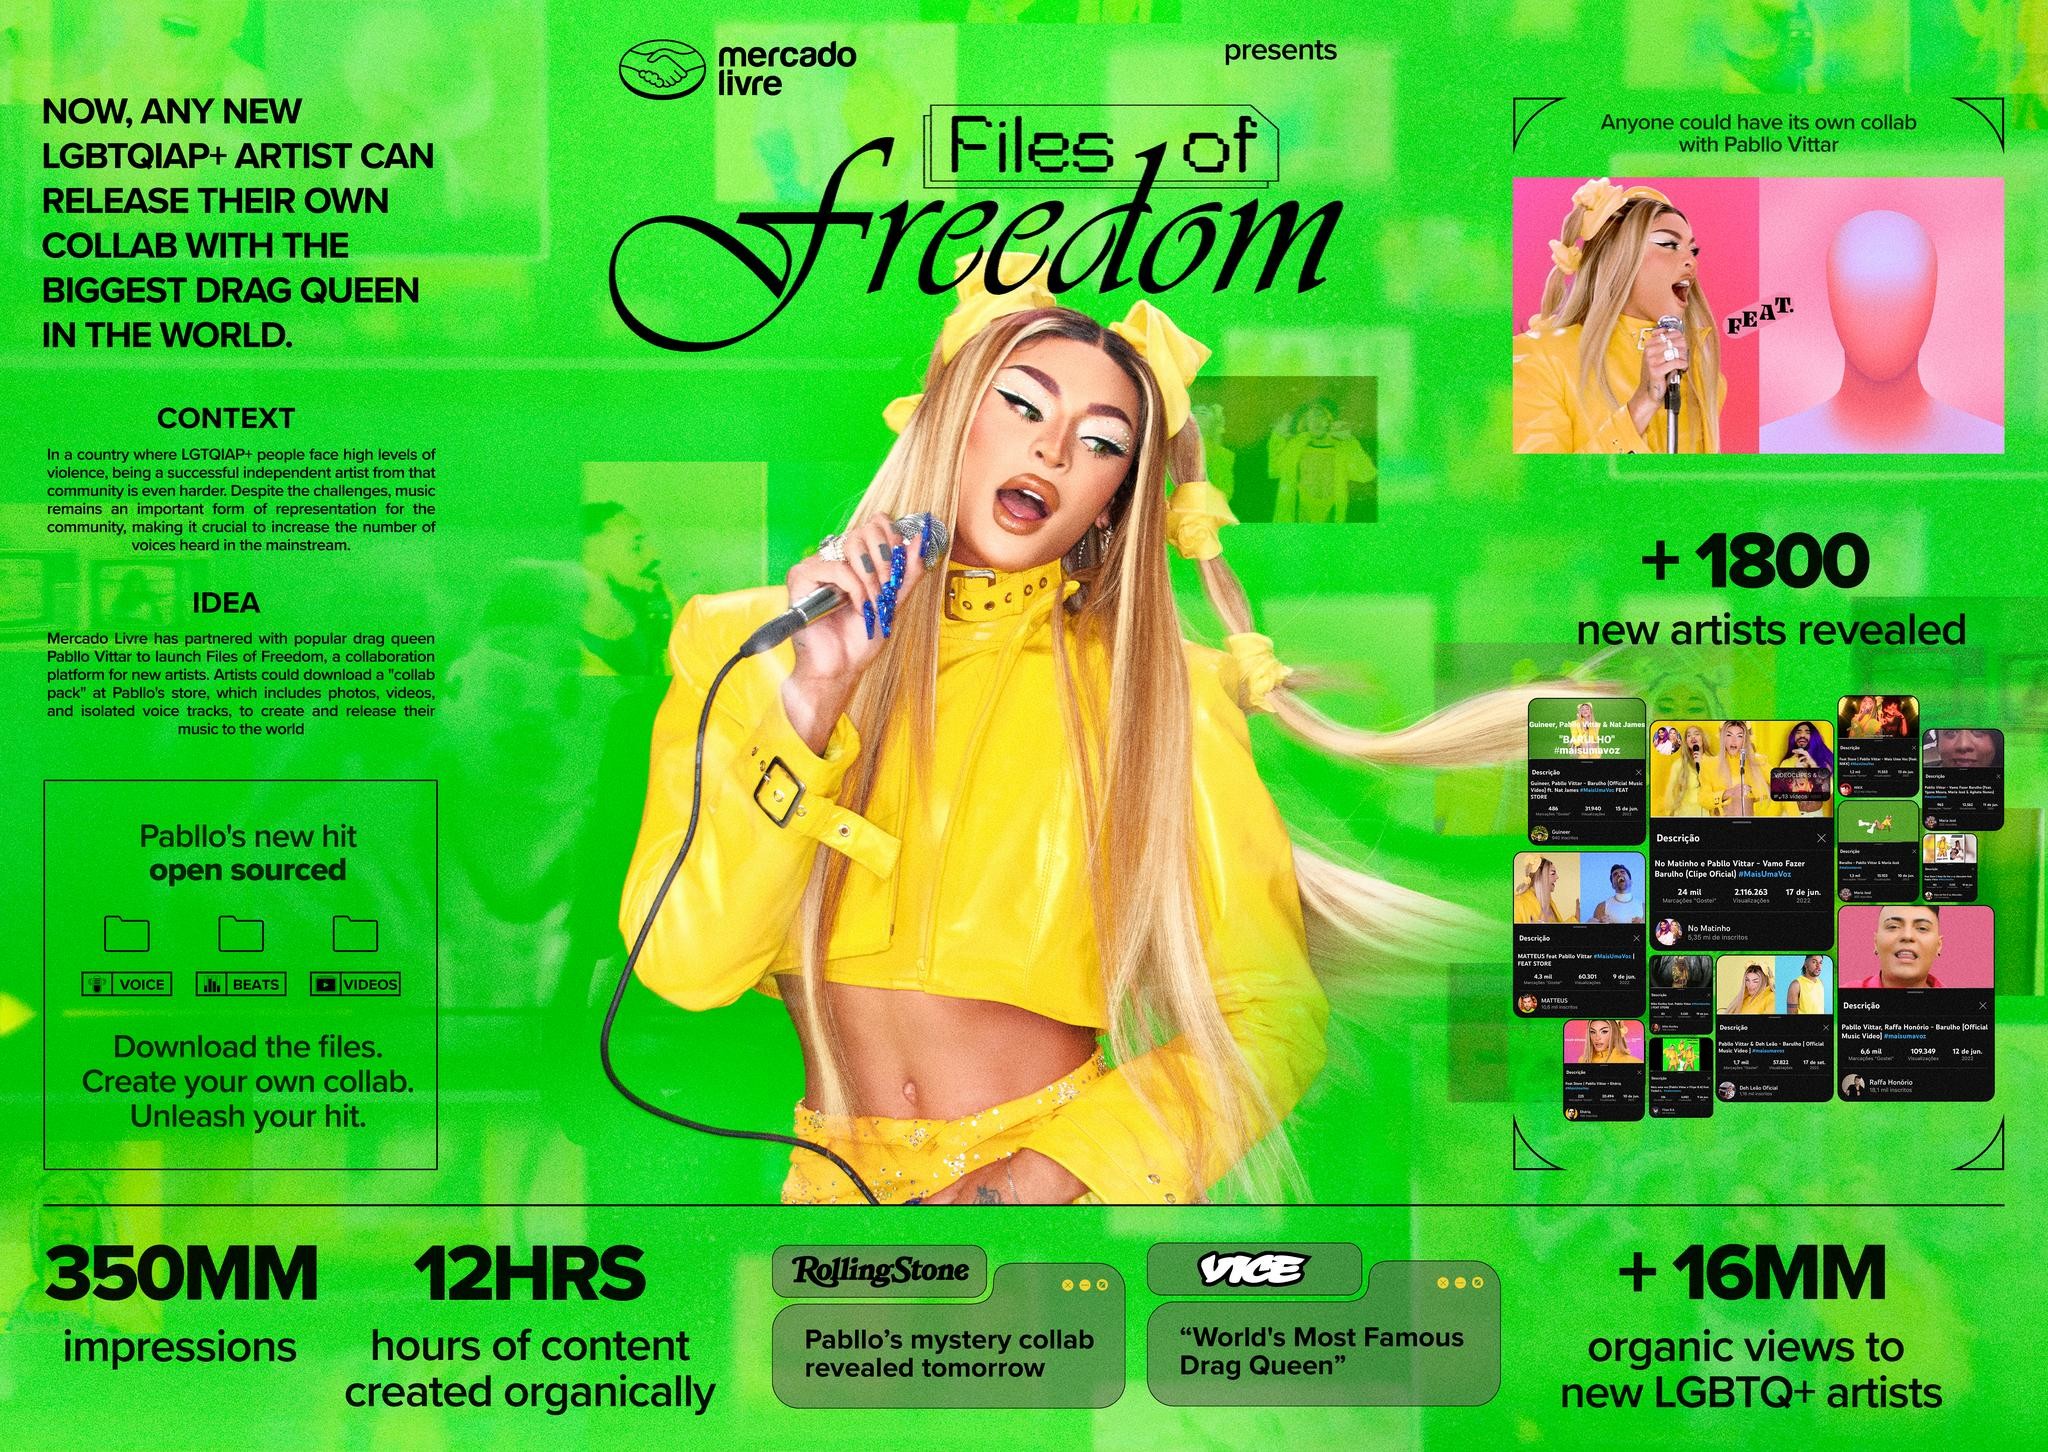 FILES OF FREEDOM